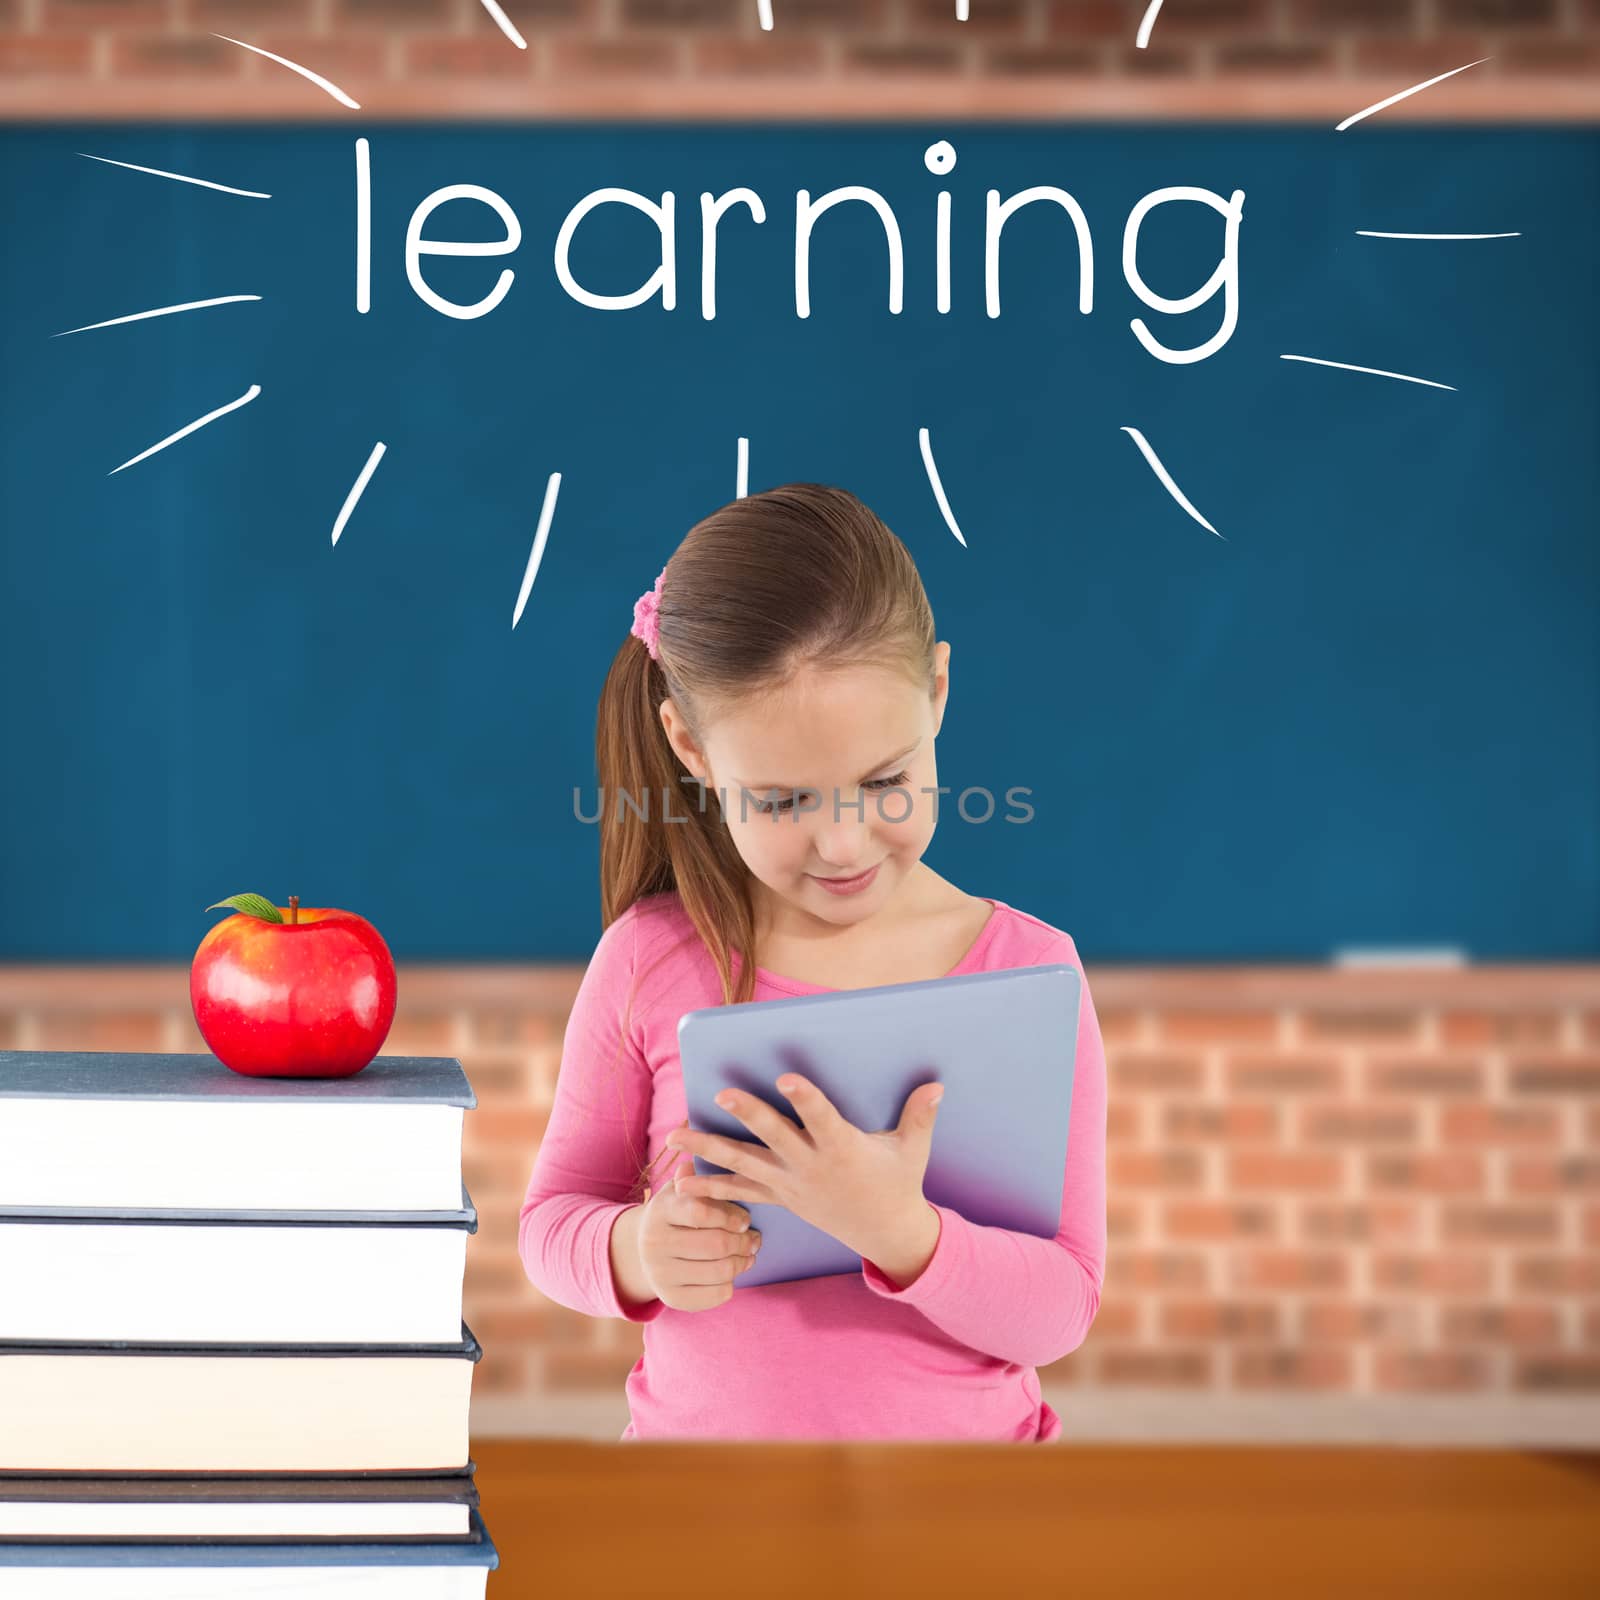 The word learning and cute girl using tablet against red apple on pile of books in classroom